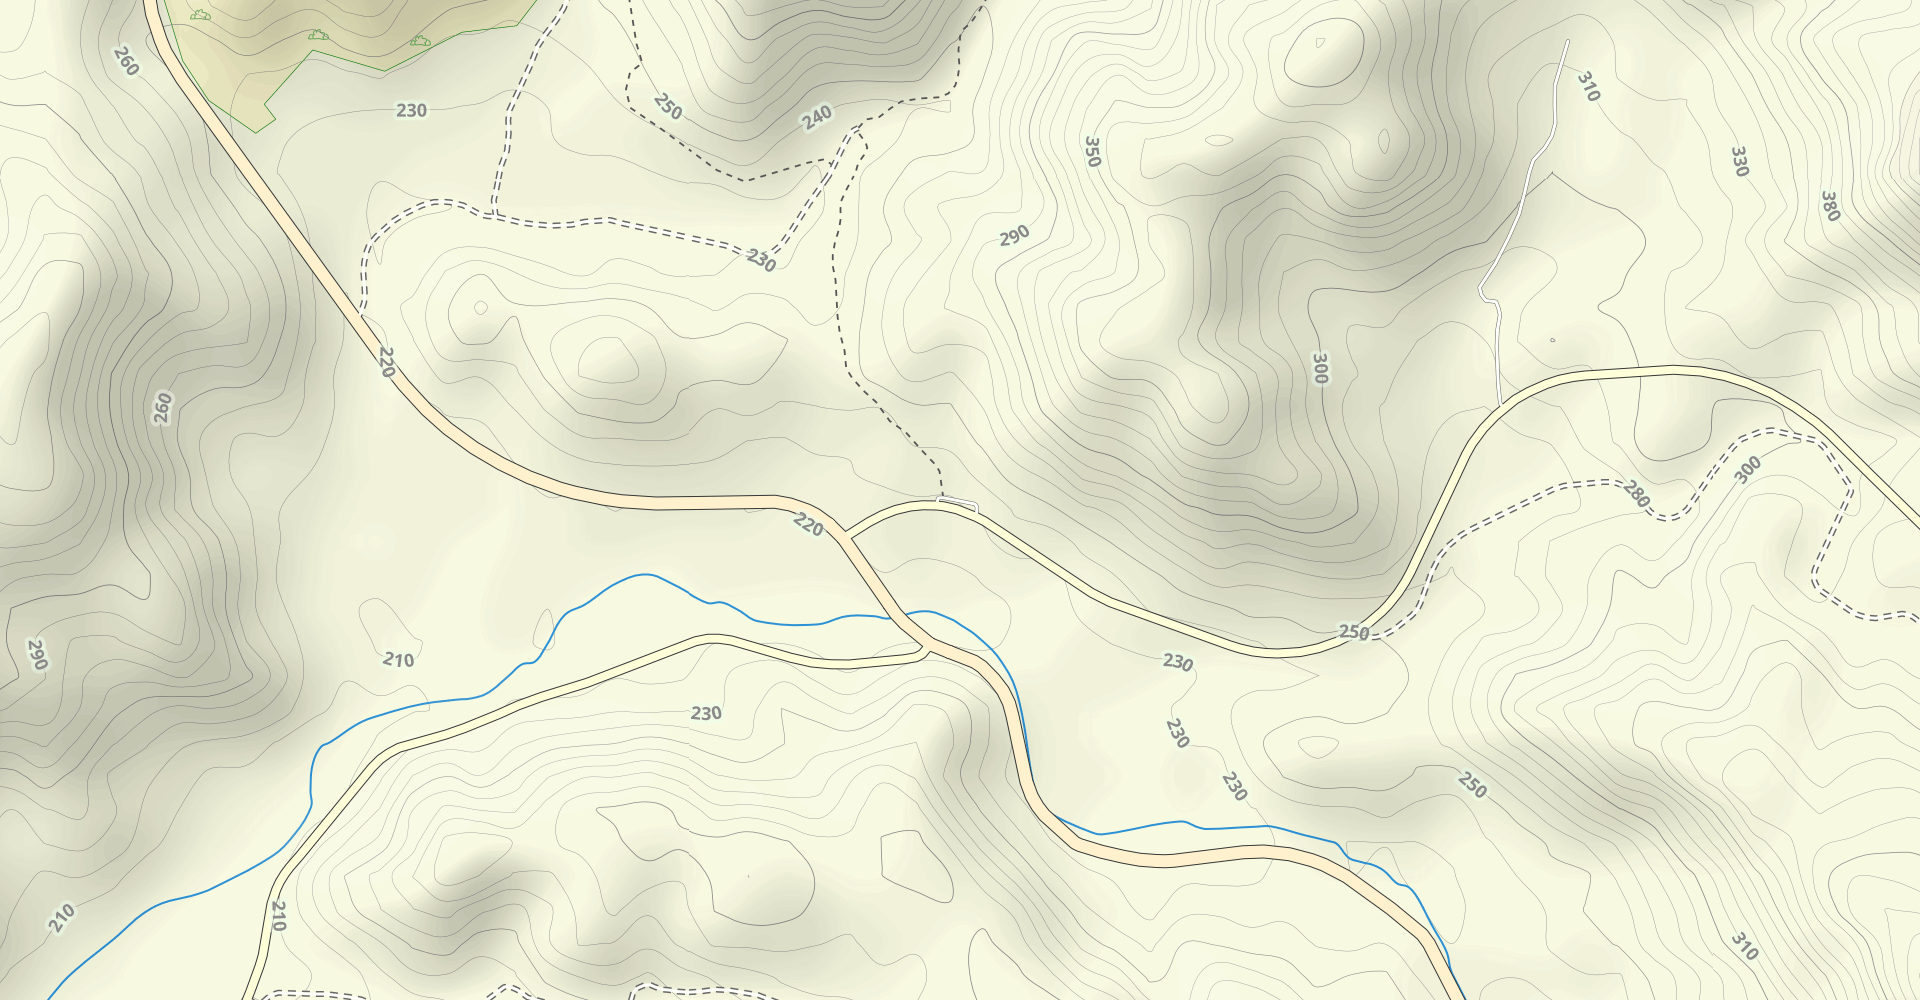 Hollenbeck Canyon Extended Loop